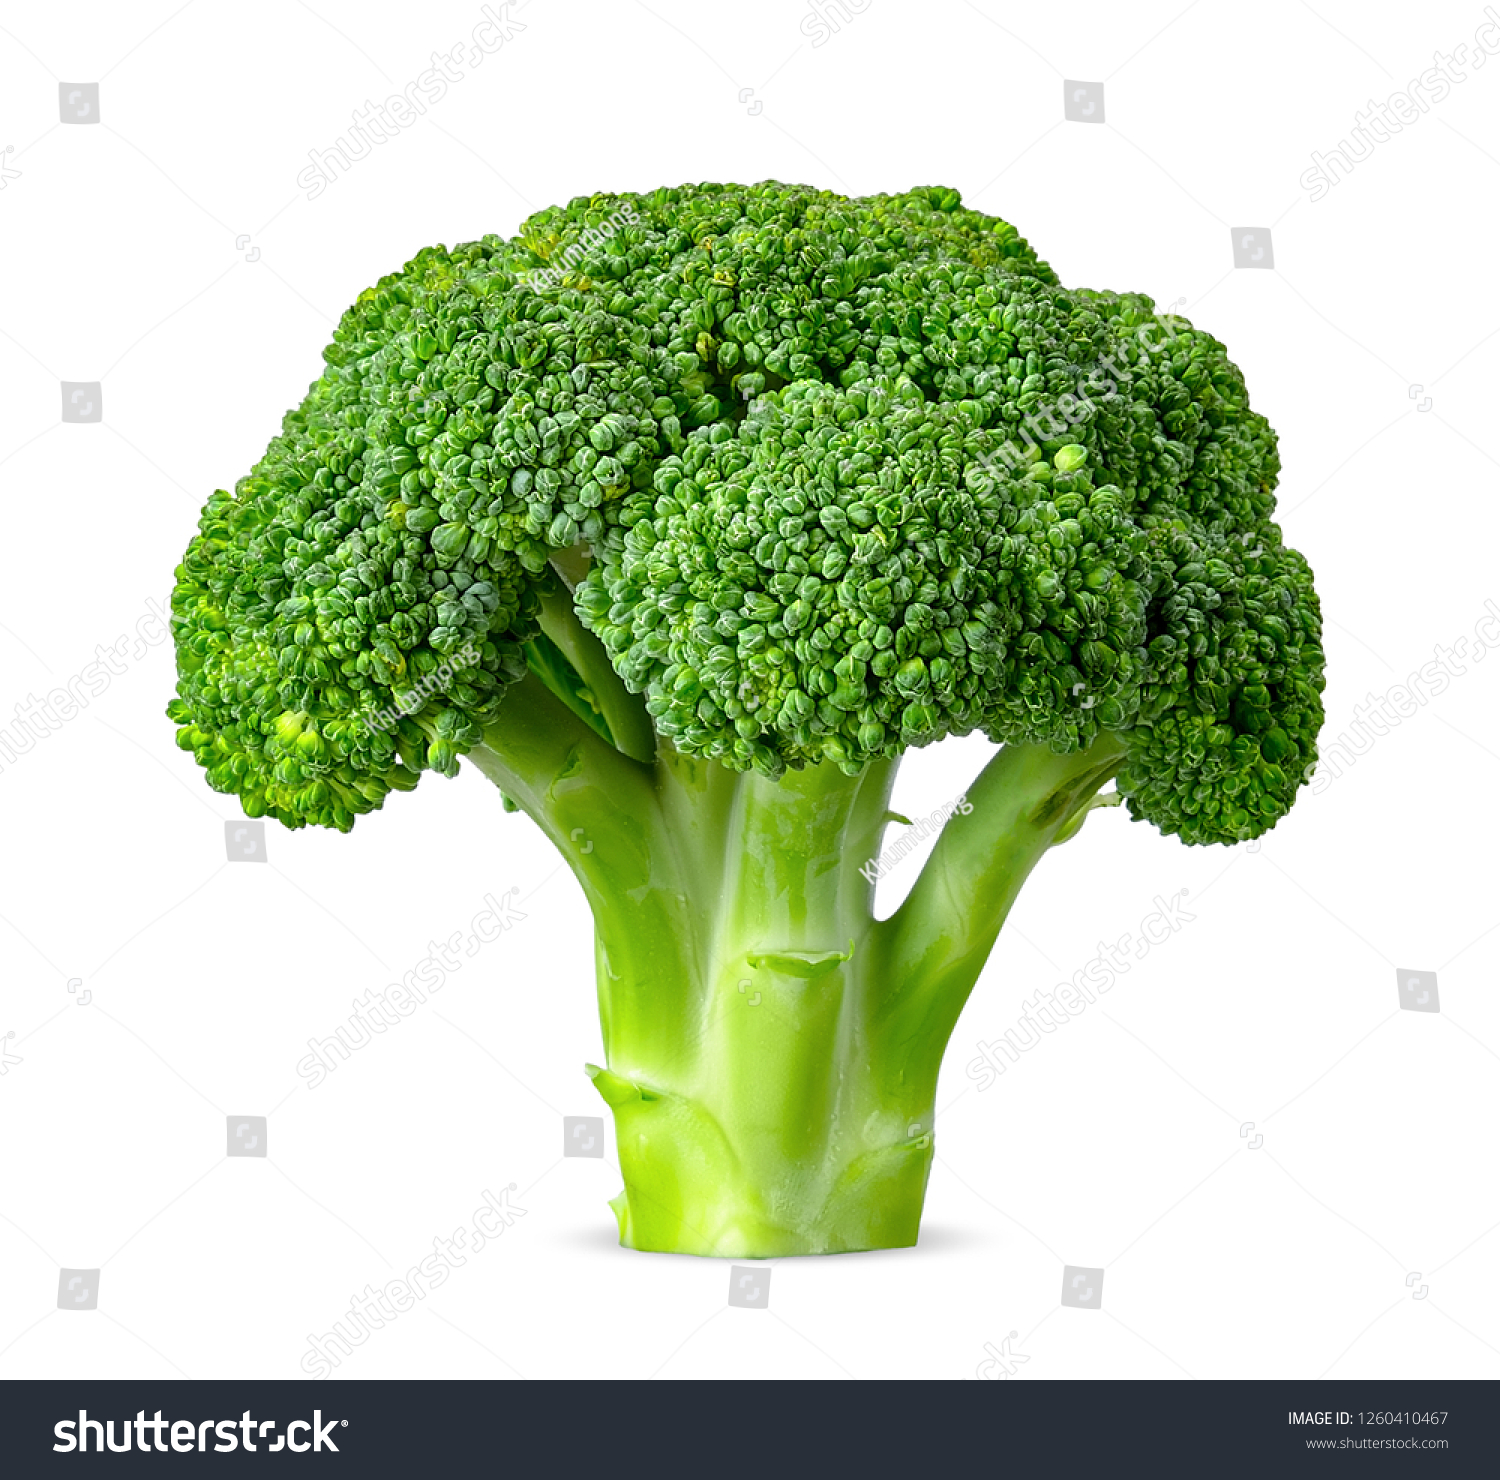 Broccoli isolated on white background with clipping path #1260410467